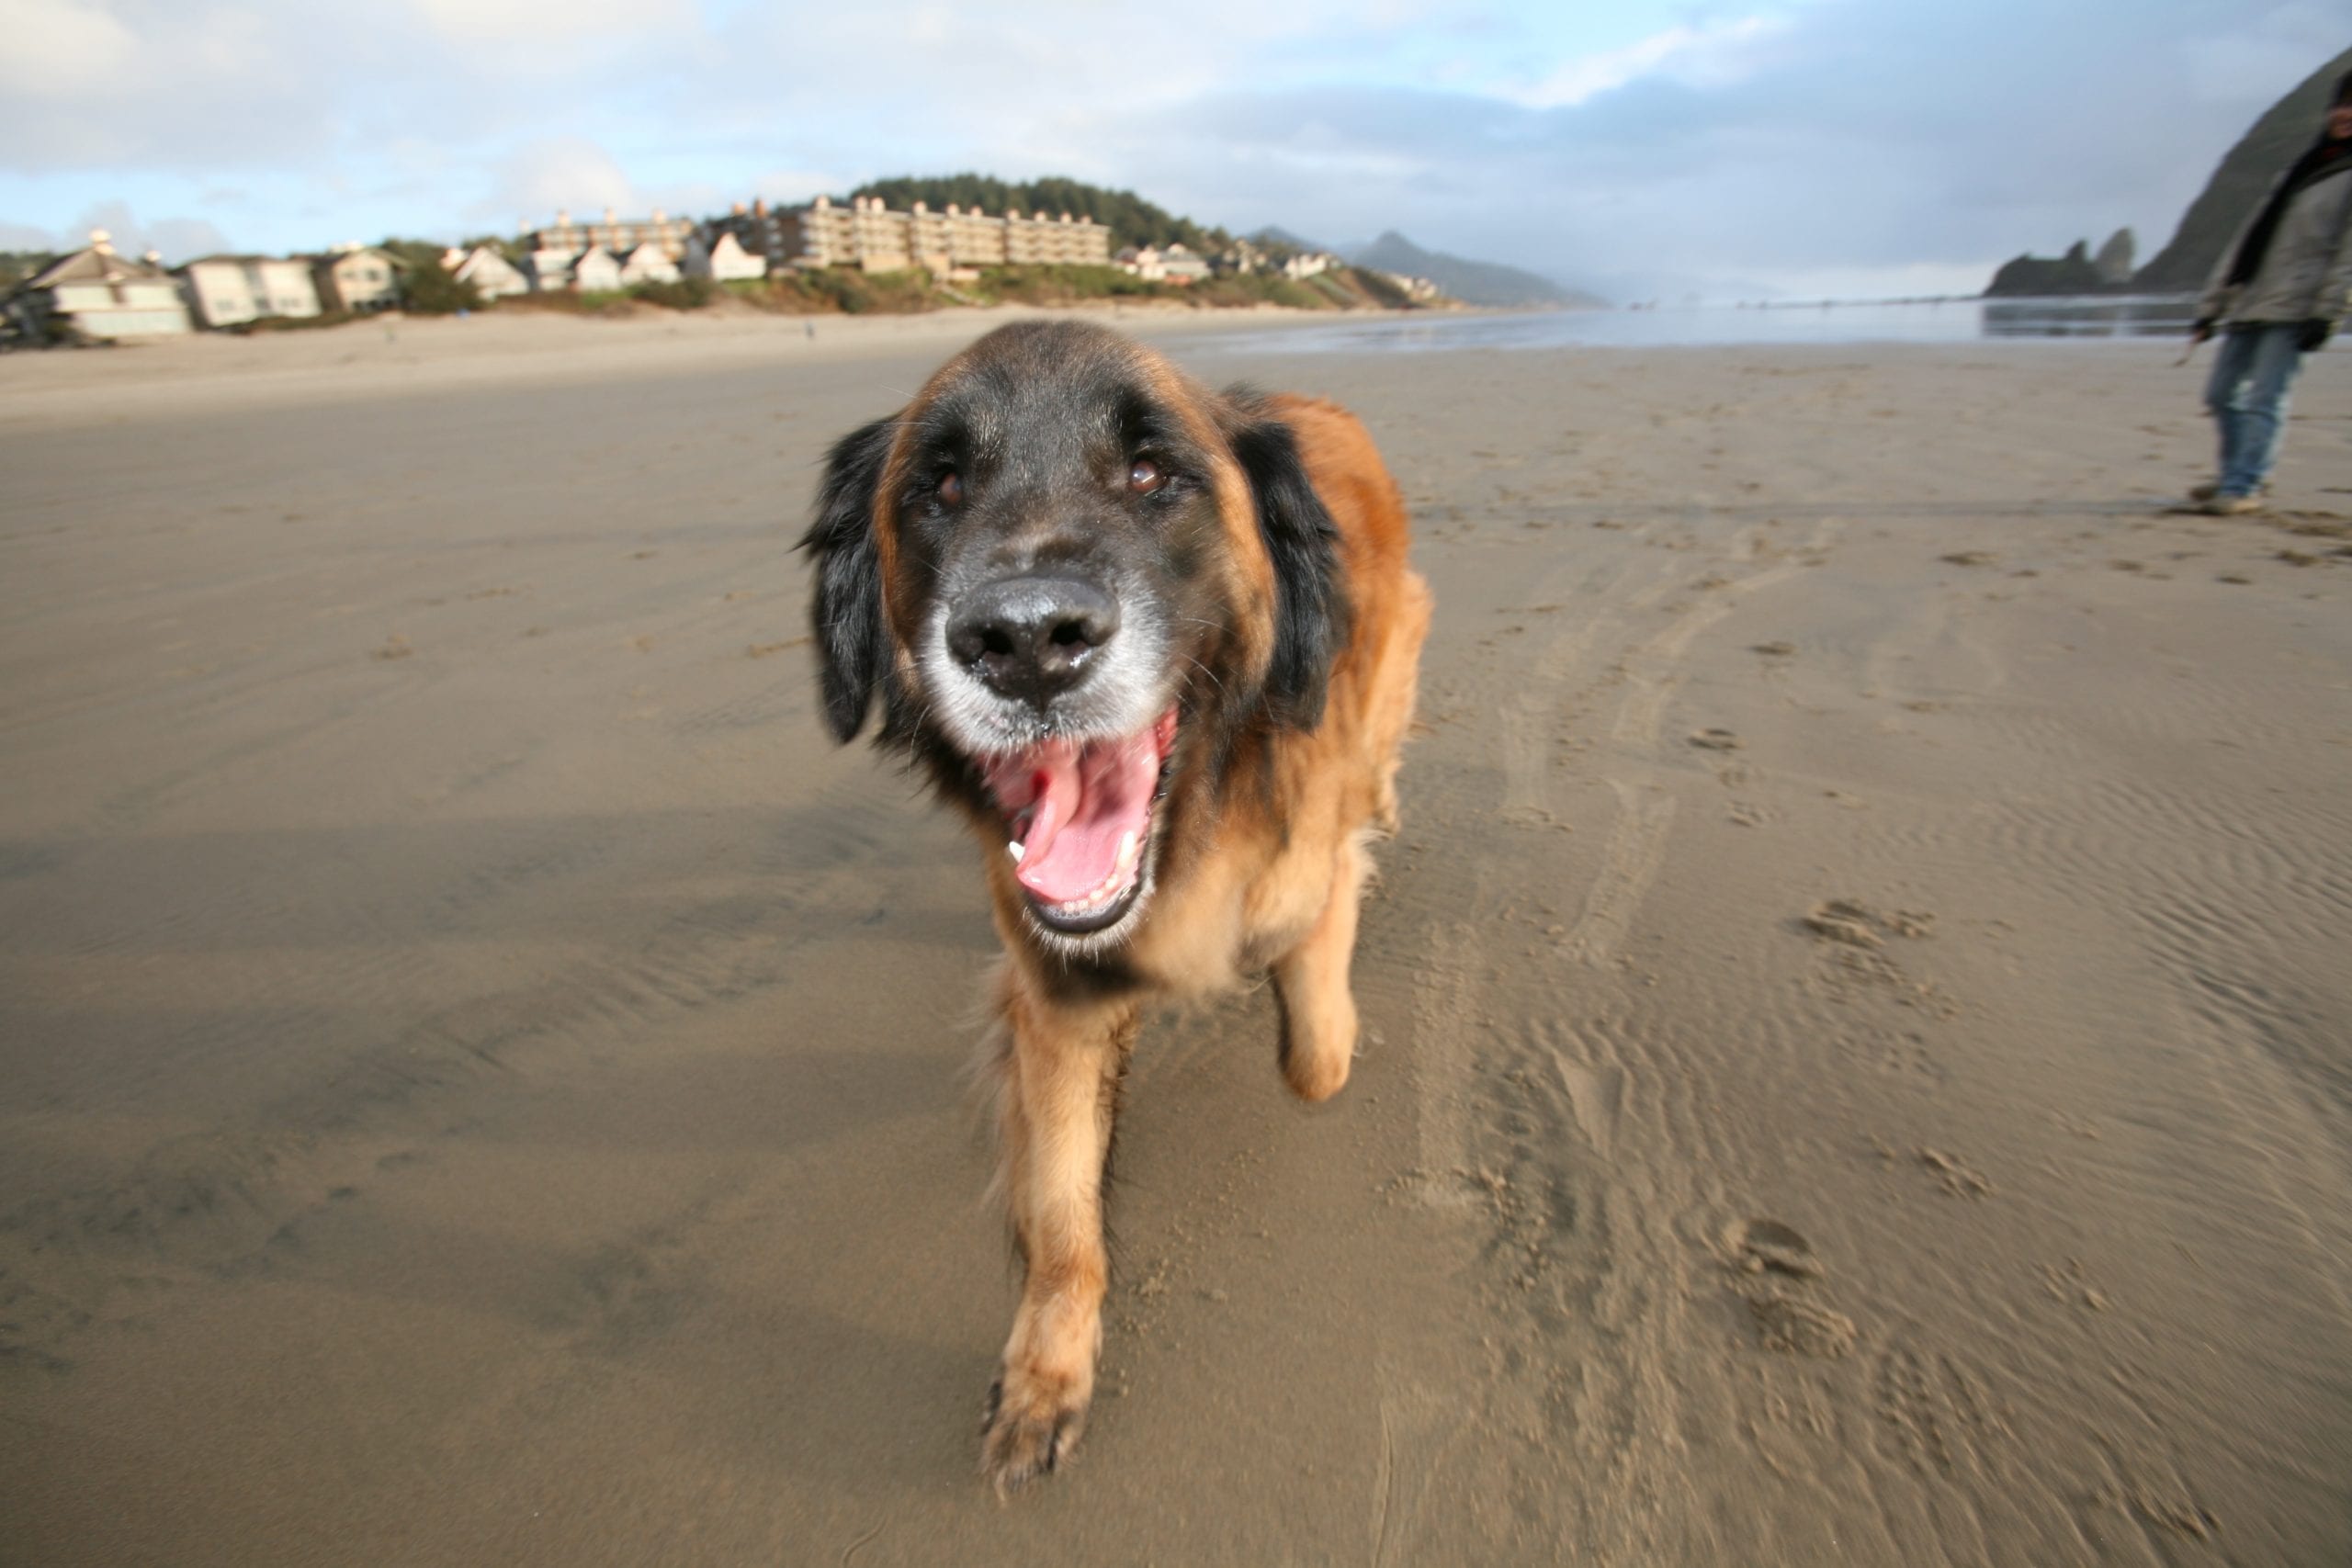 Murphy's excursion to dog-friendly Cannon Beach, Oregon